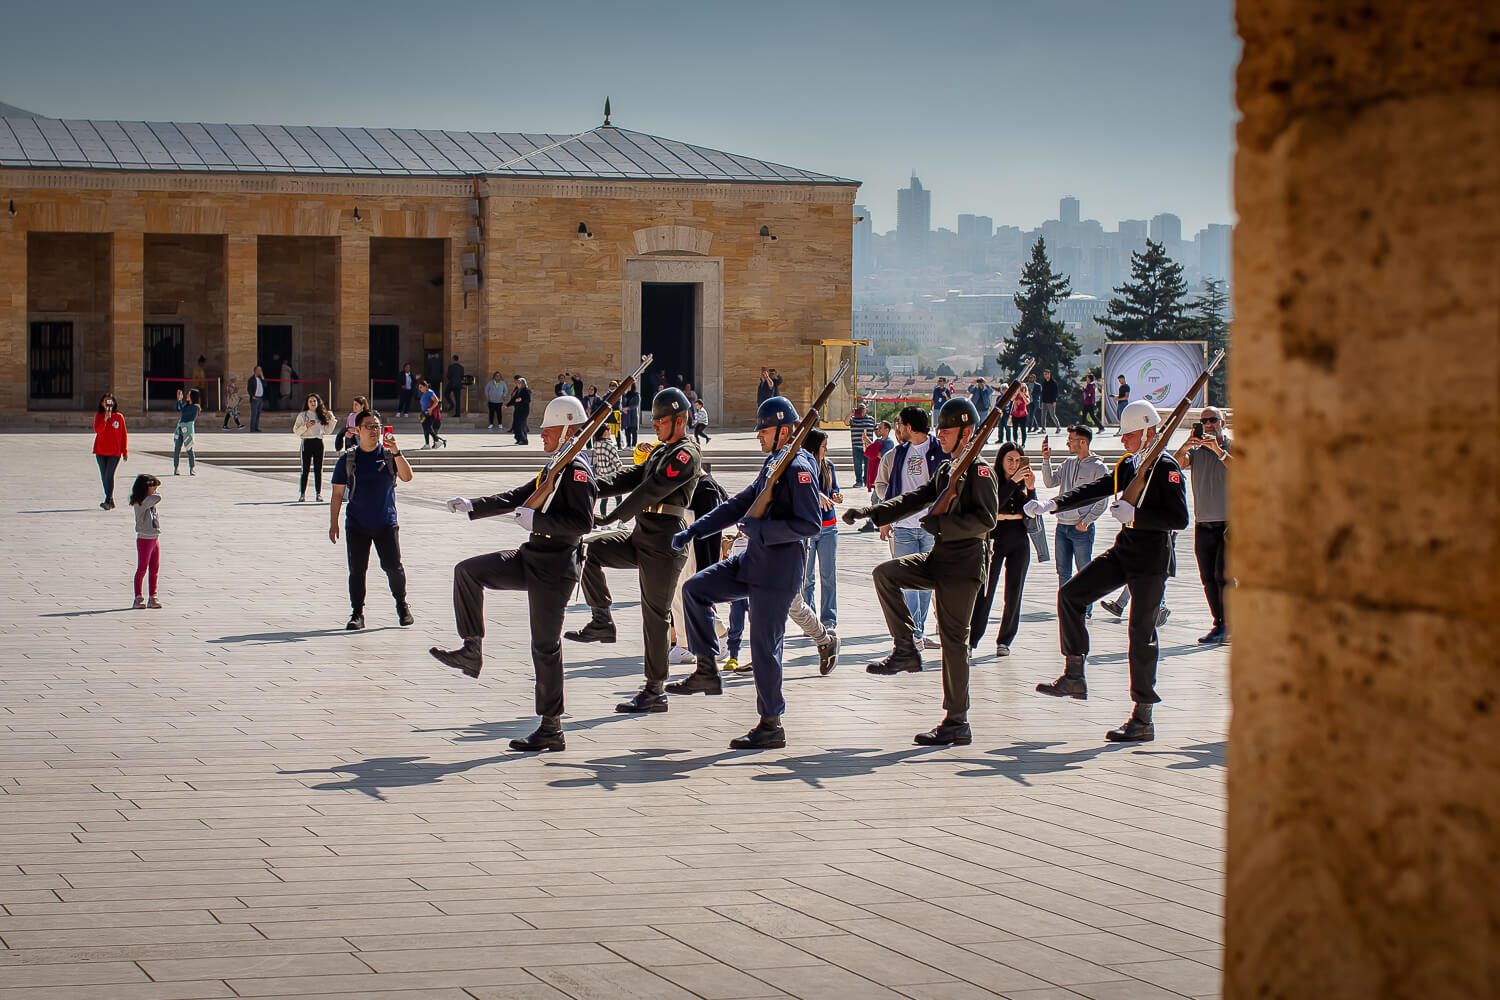 Soliders Marching at the Antikabir Museum